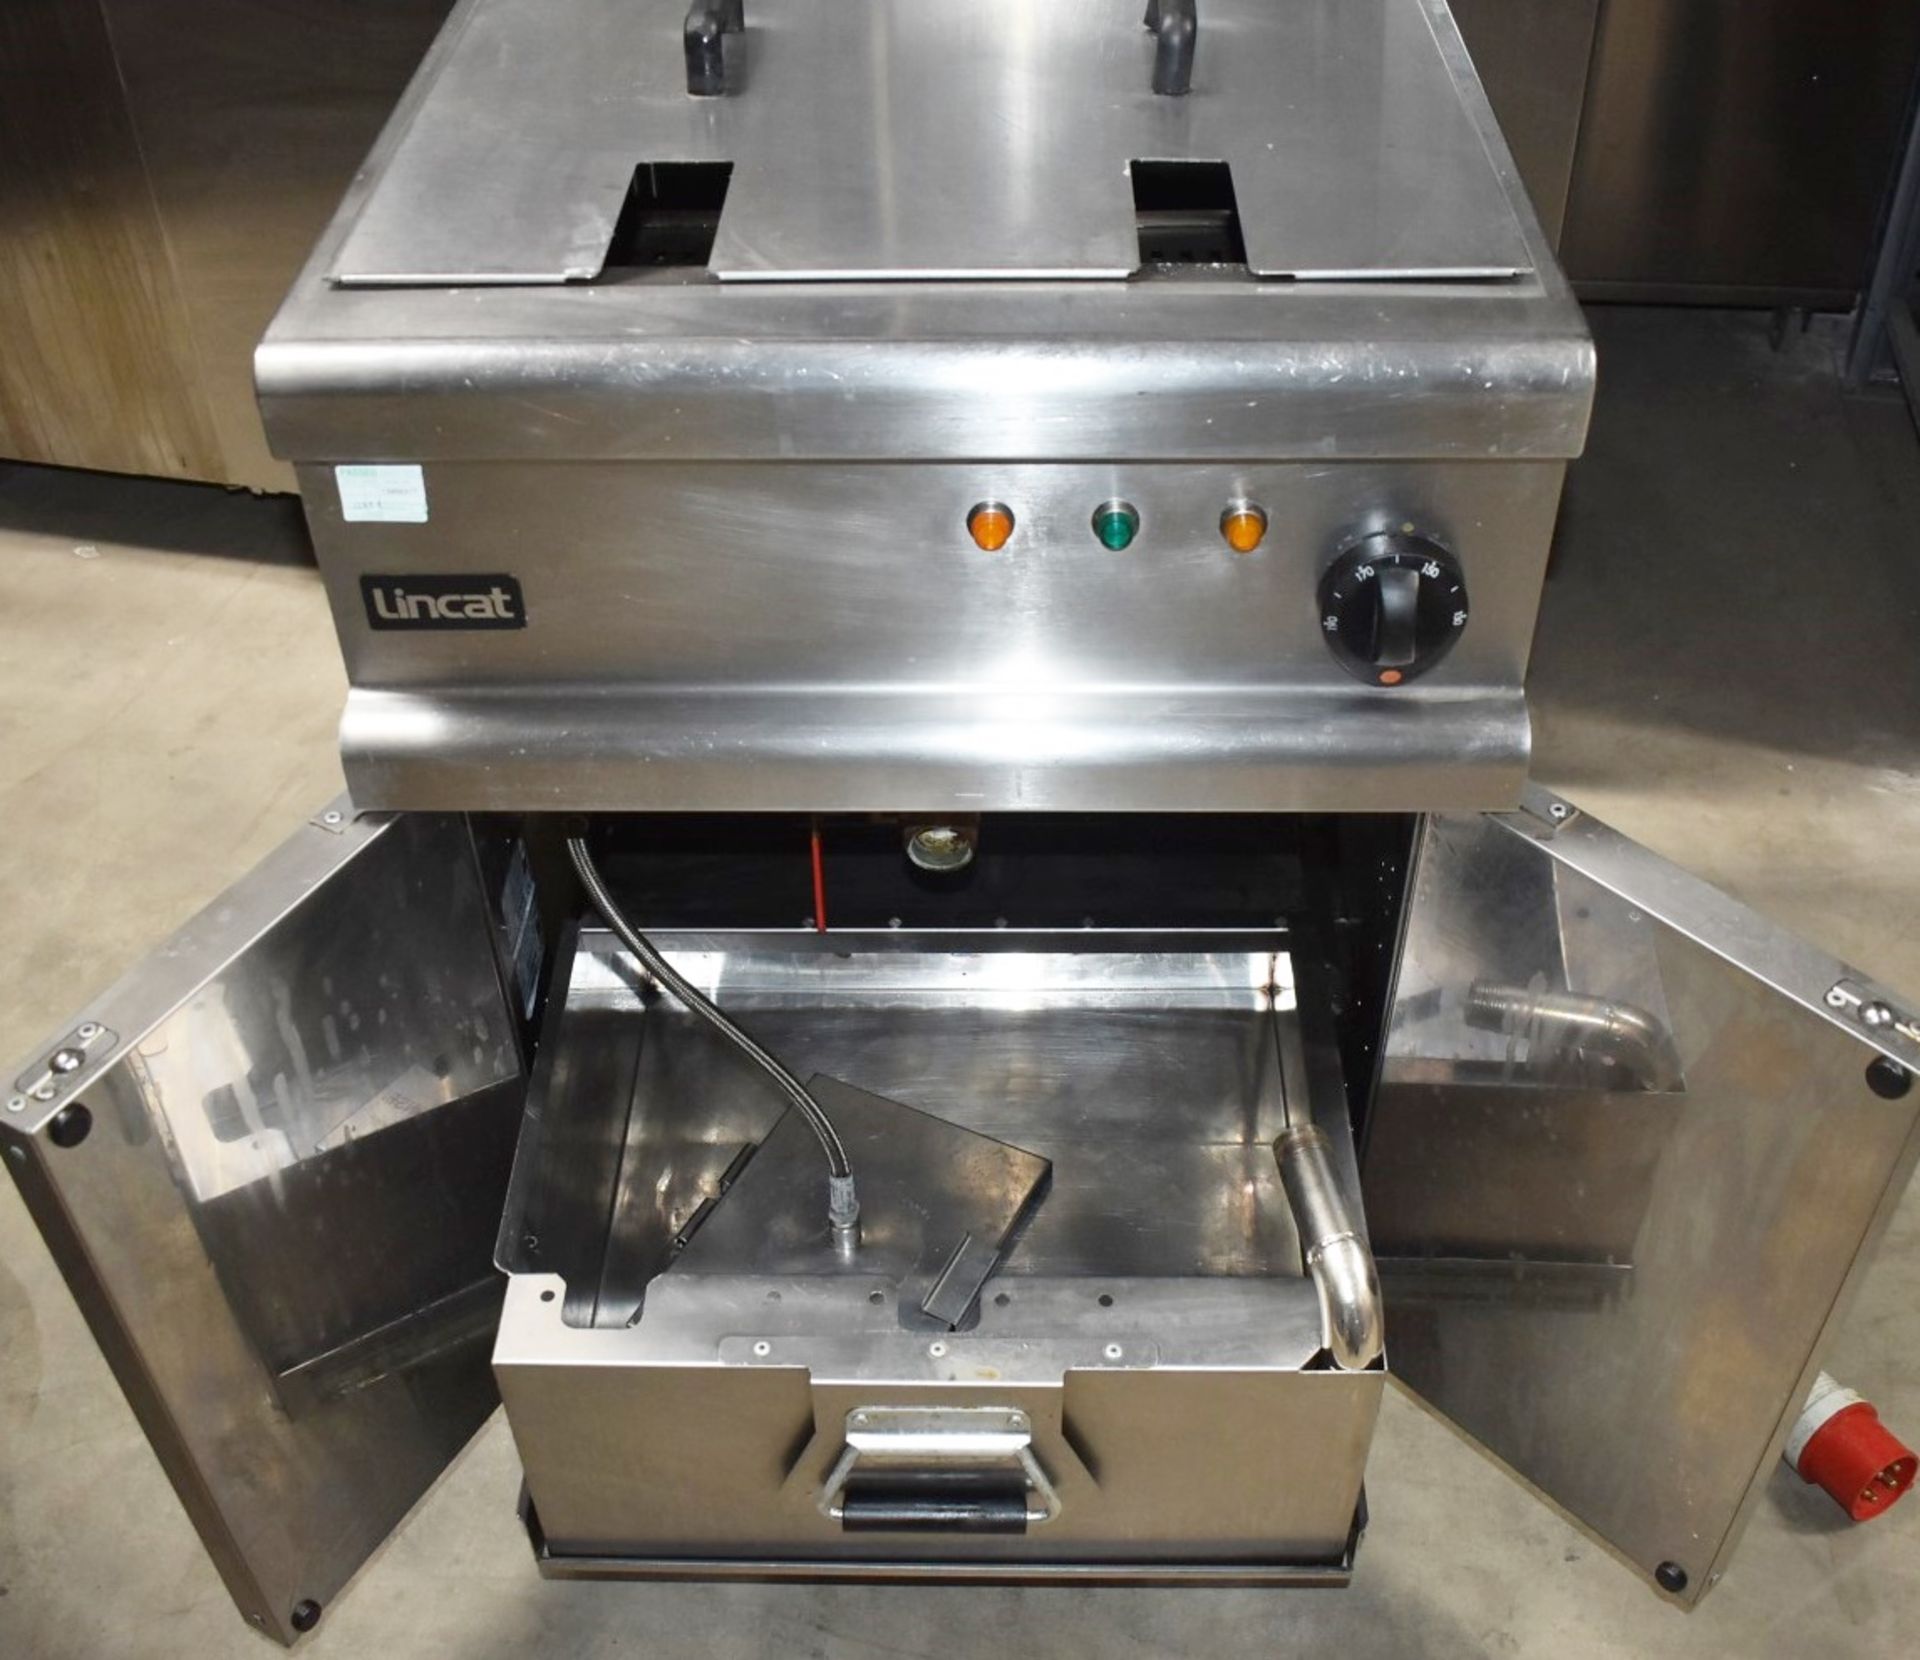 1 x Lincat Opus 700 Single Tank Electric Fryer With Built In Filtration - 3 Phase - Approx RRP £3000 - Image 11 of 15